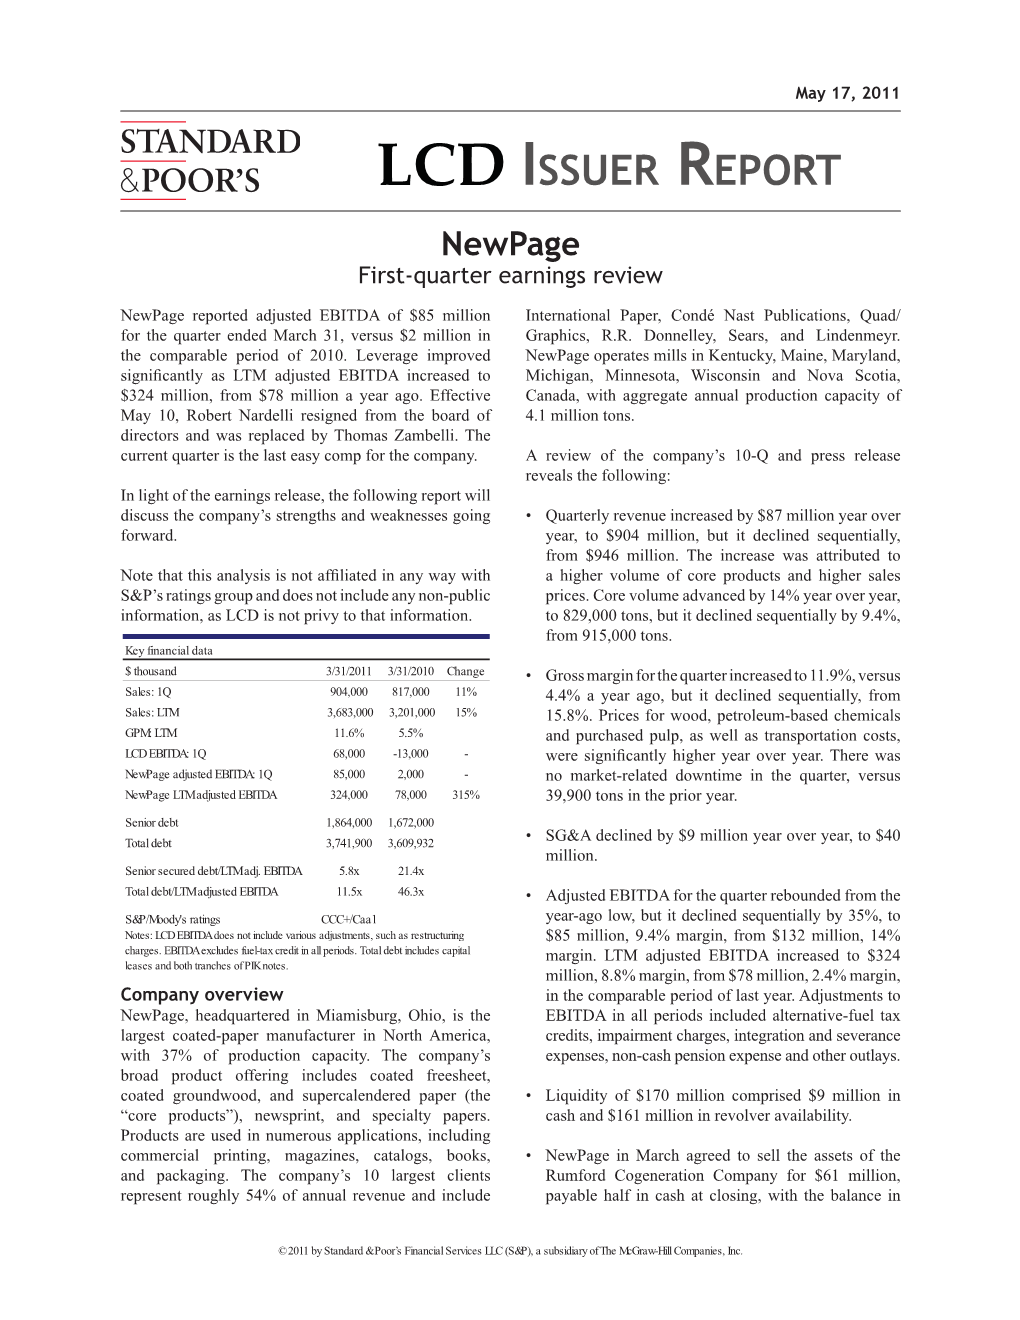 LCD ISSUER REPORT Newpage First-Quarter Earnings Review